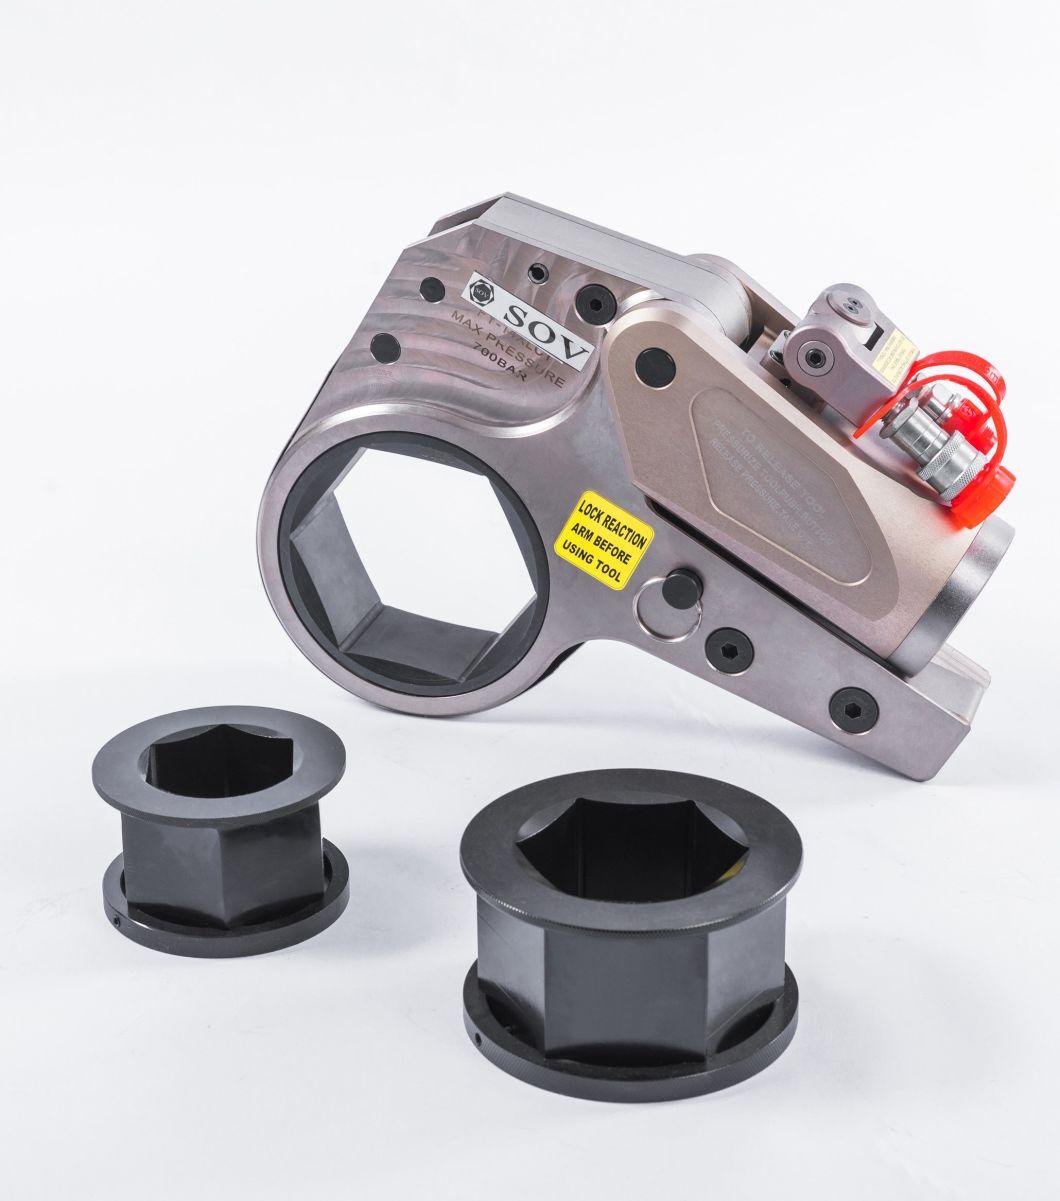 Fast Delivery Hexagon Cassette Hydraulic Wrench